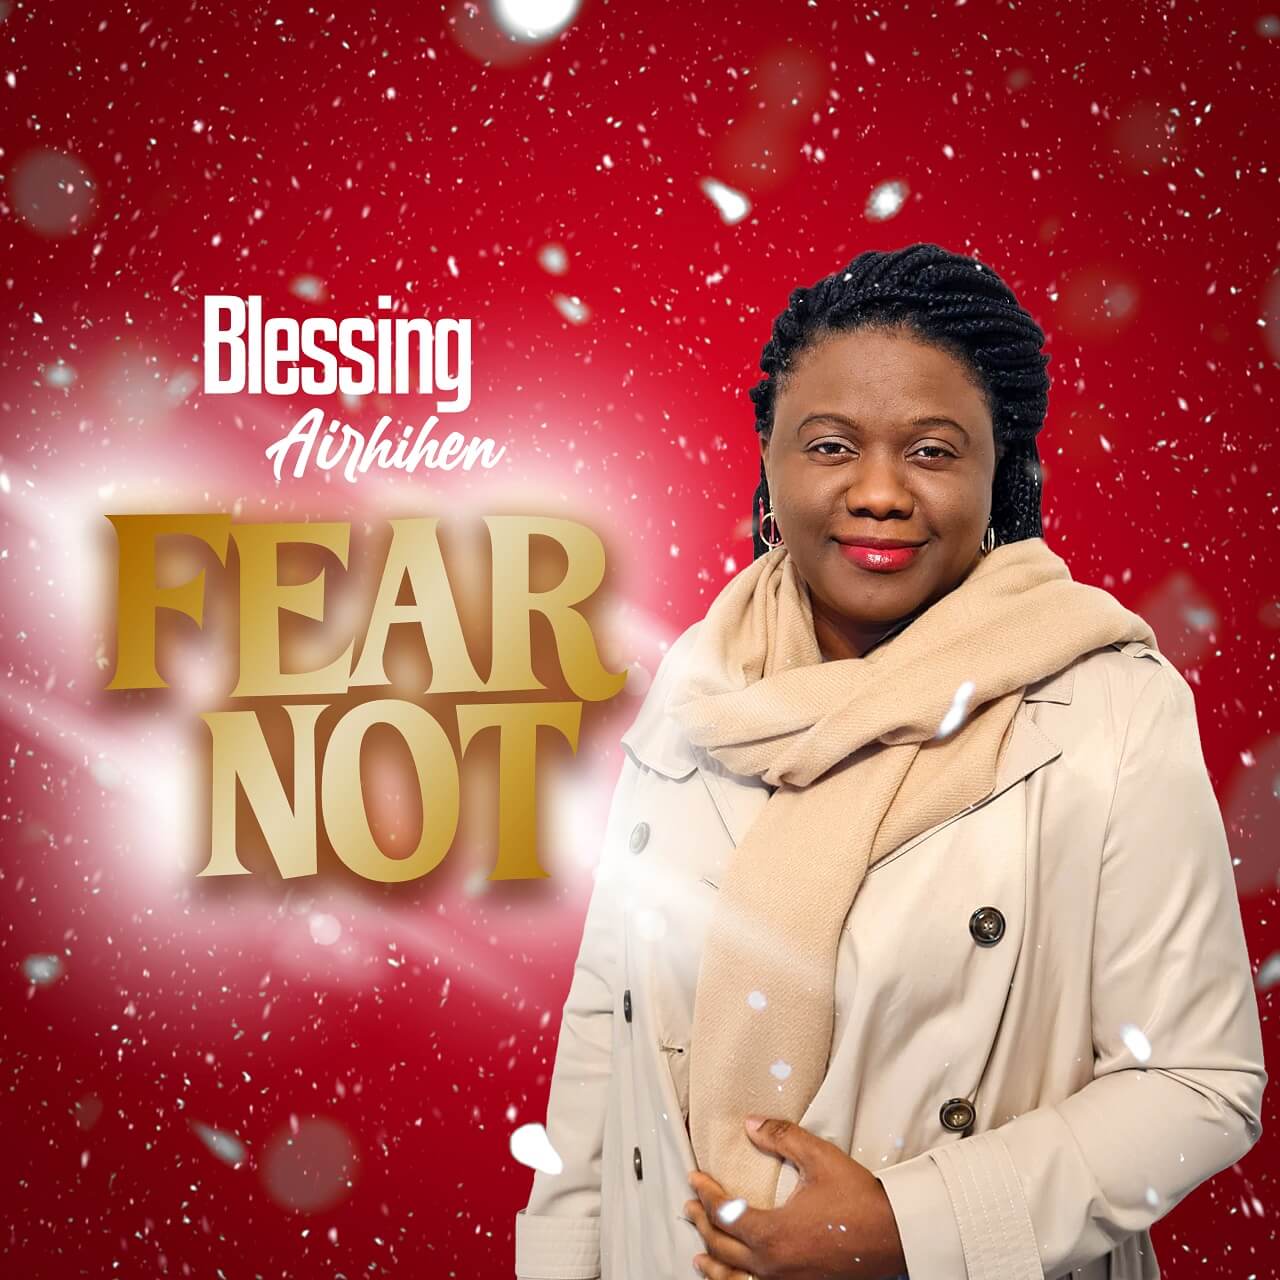 Fear Not by Blessing Airhihen